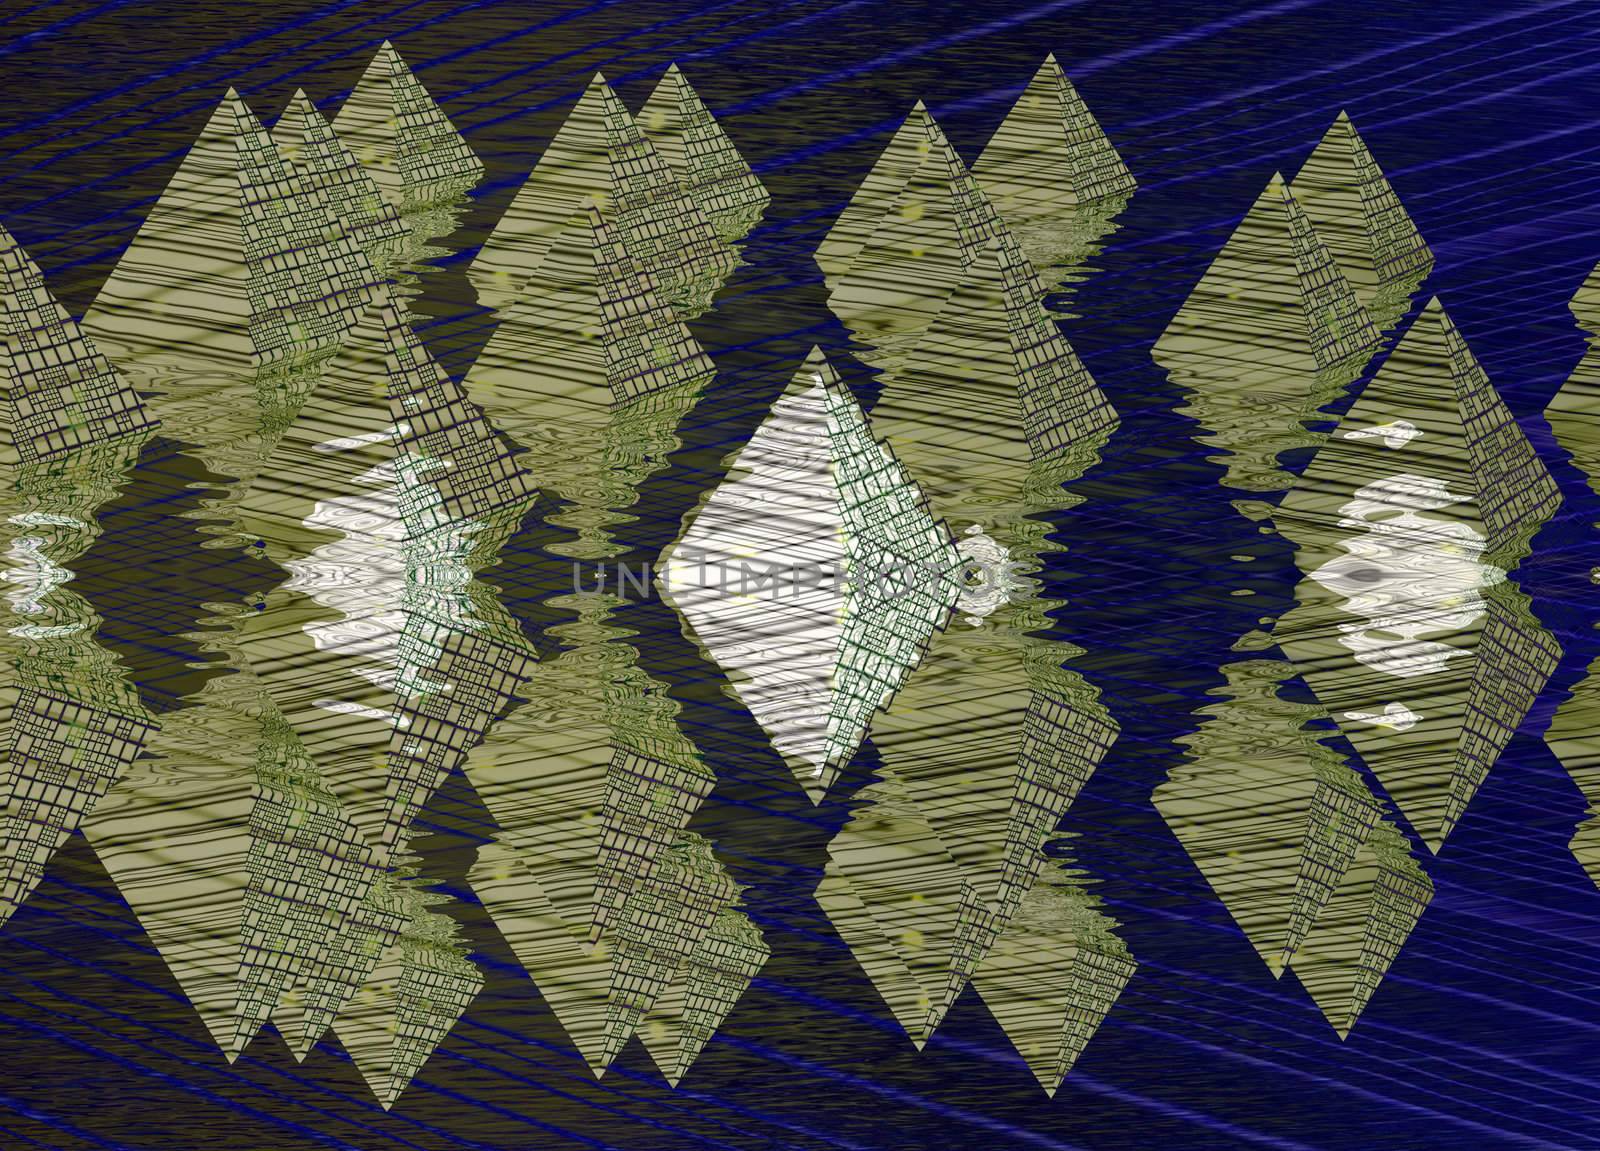 Digital Effect Pyramids with Reflections on Water 3d Rendered Il by bobbigmac